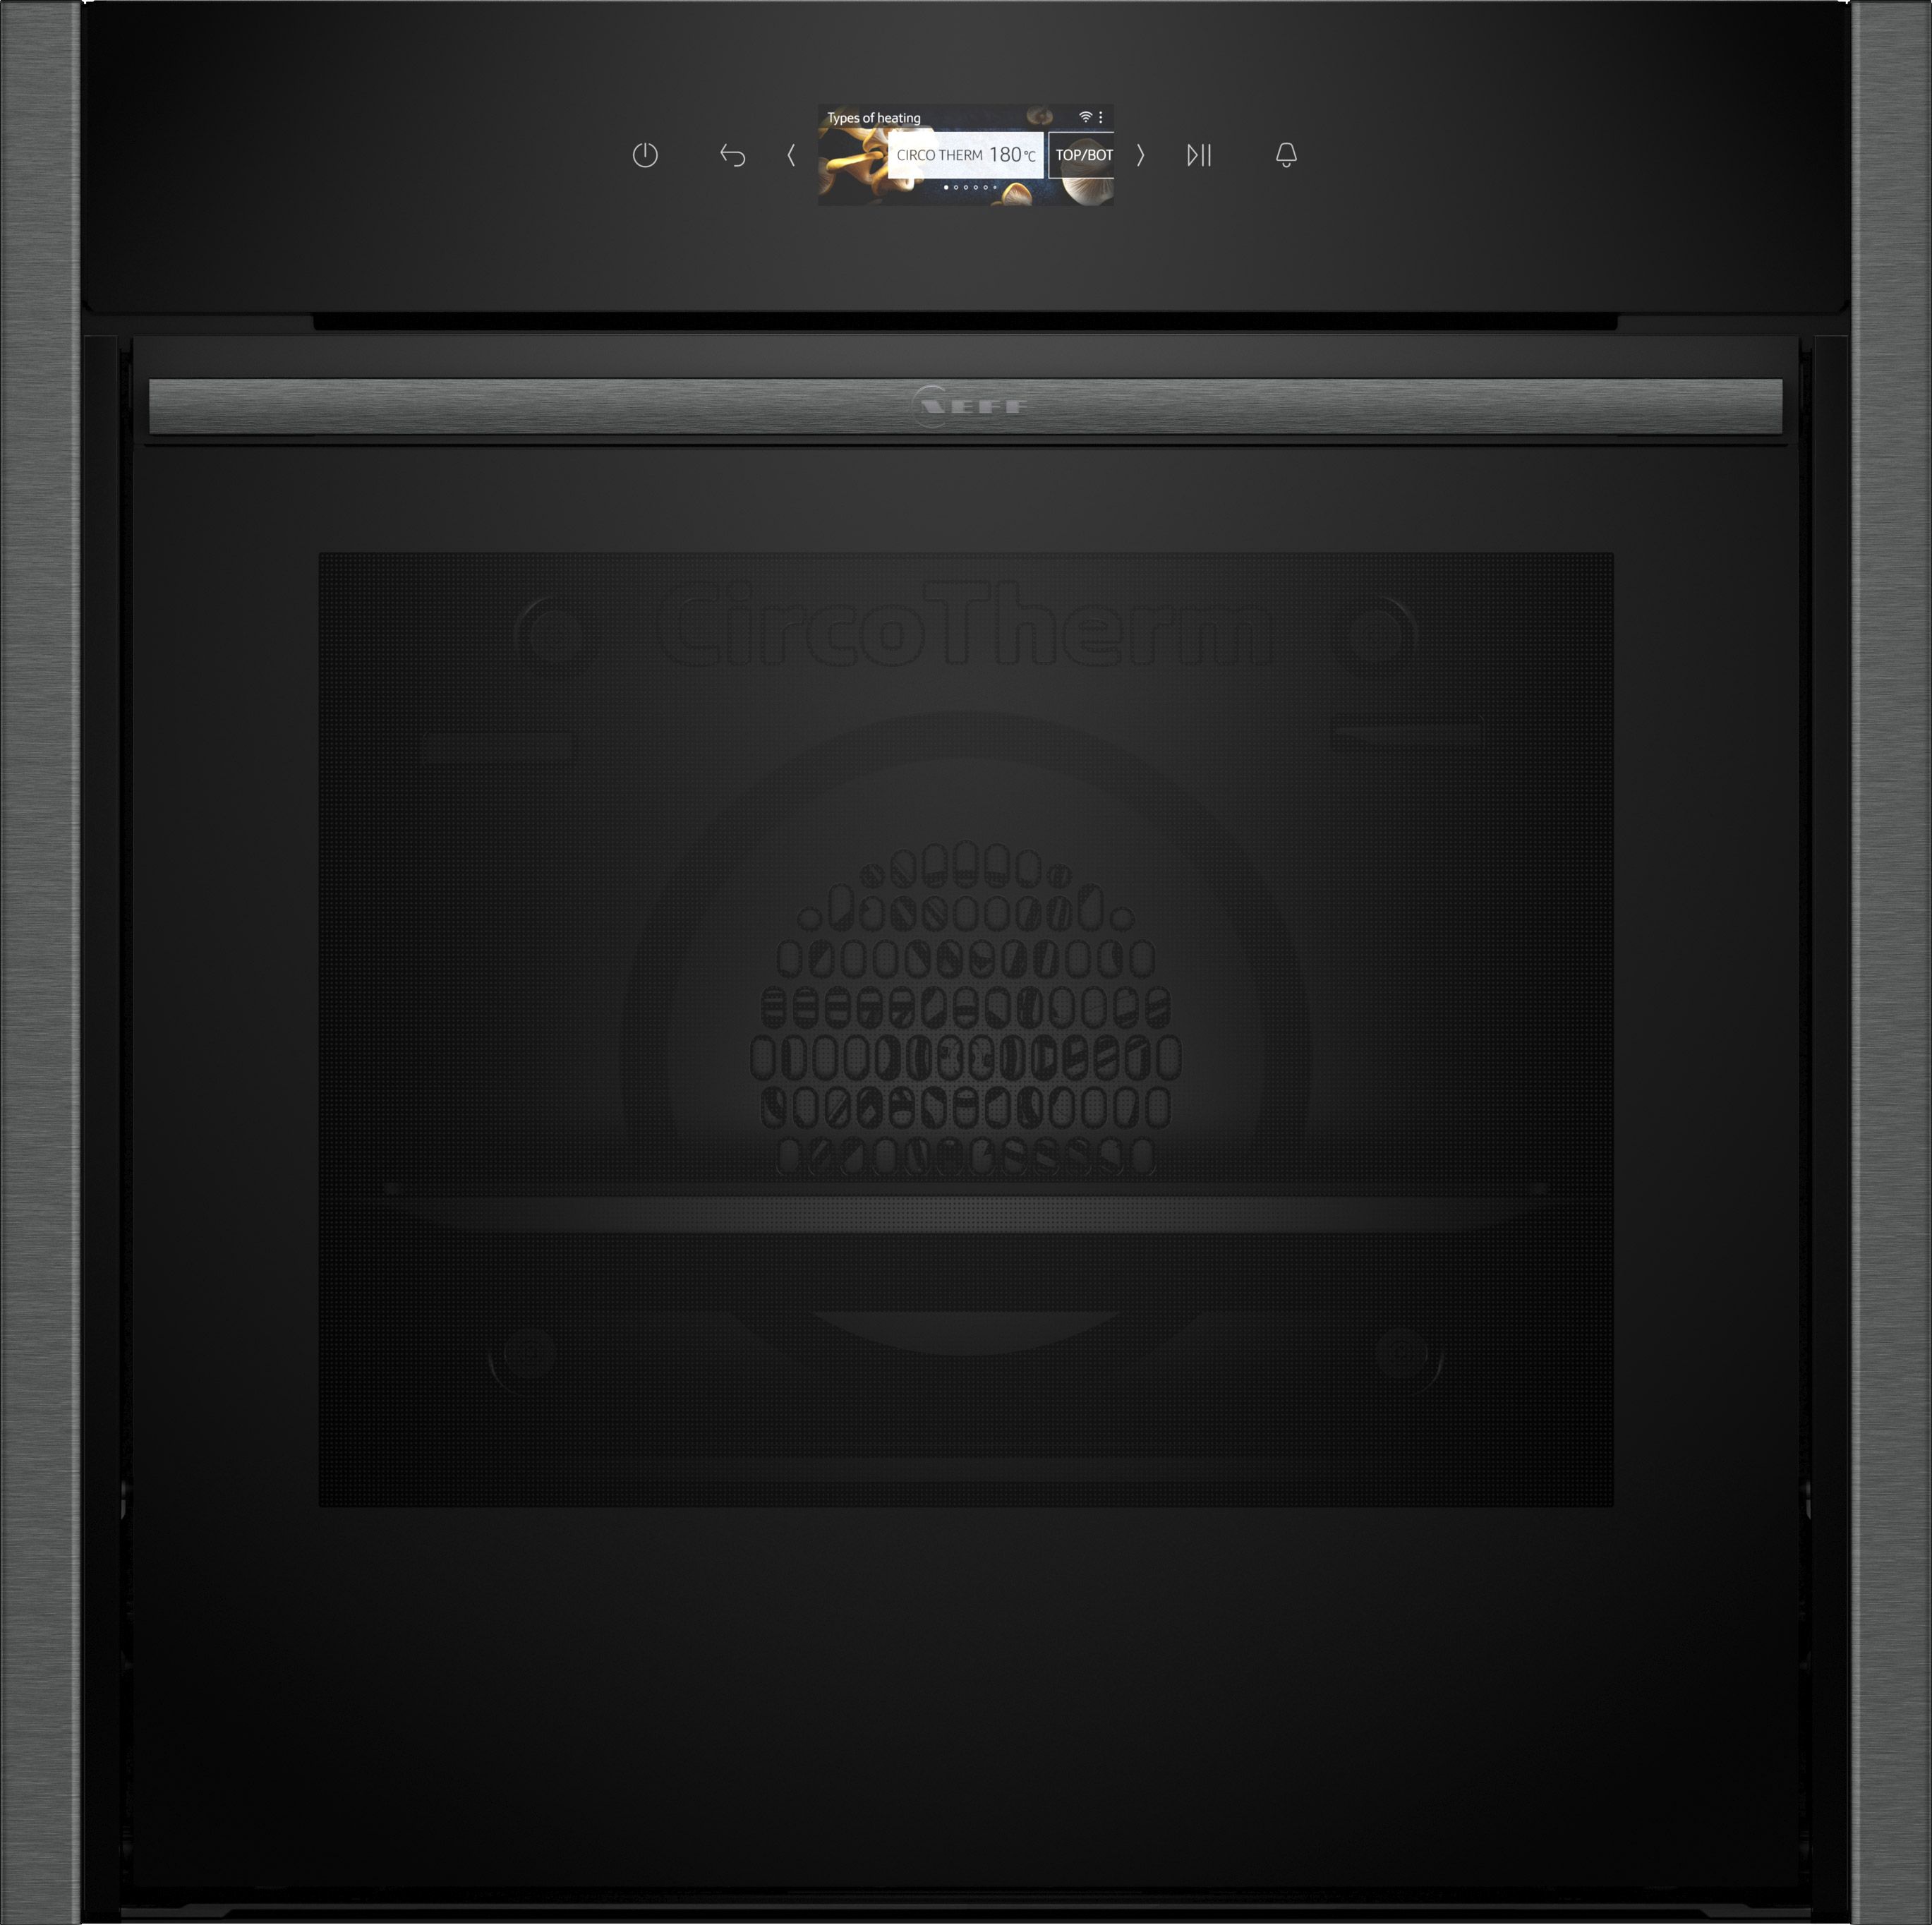 NEFF N70 Slide&Hide B54CR71G0B Built In Electric Single Oven with Pyrolytic Cleaning - Graphite - A+ Rated, Silver